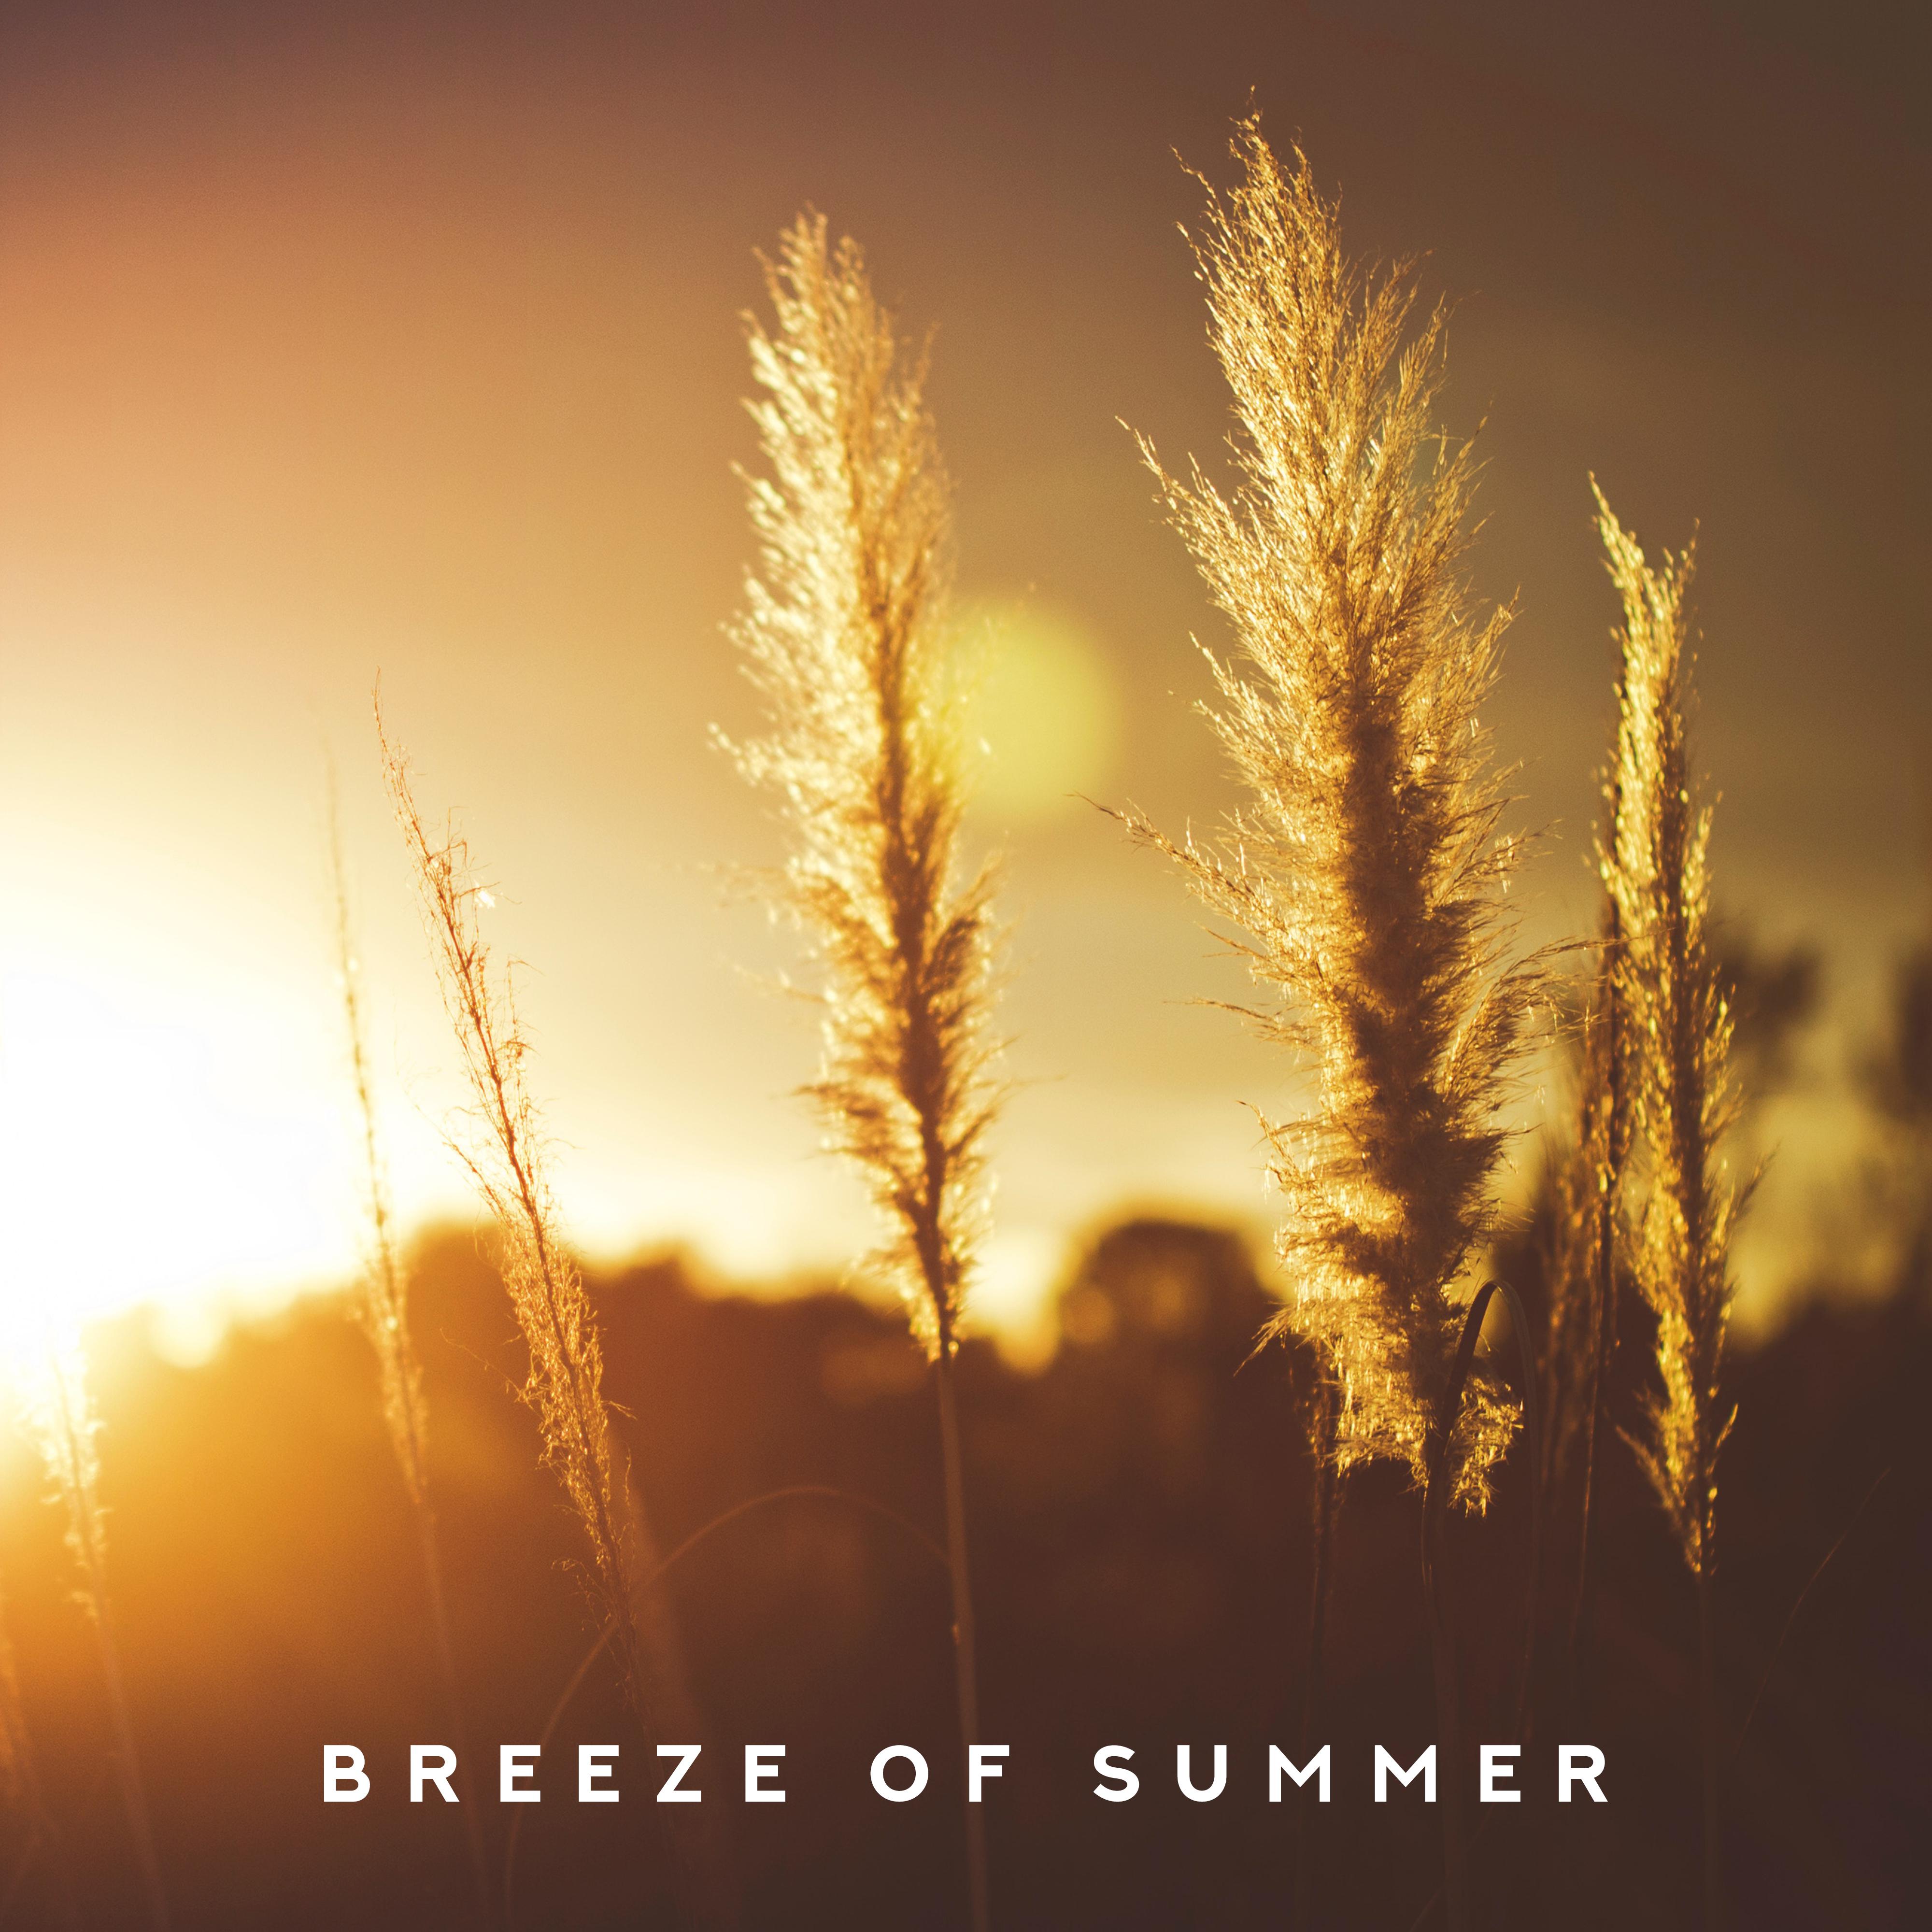 Breeze of Summer: Ibiza Vibesm, Summertime Music, Deep Chillout, Vacation Songs, Tranquil Music